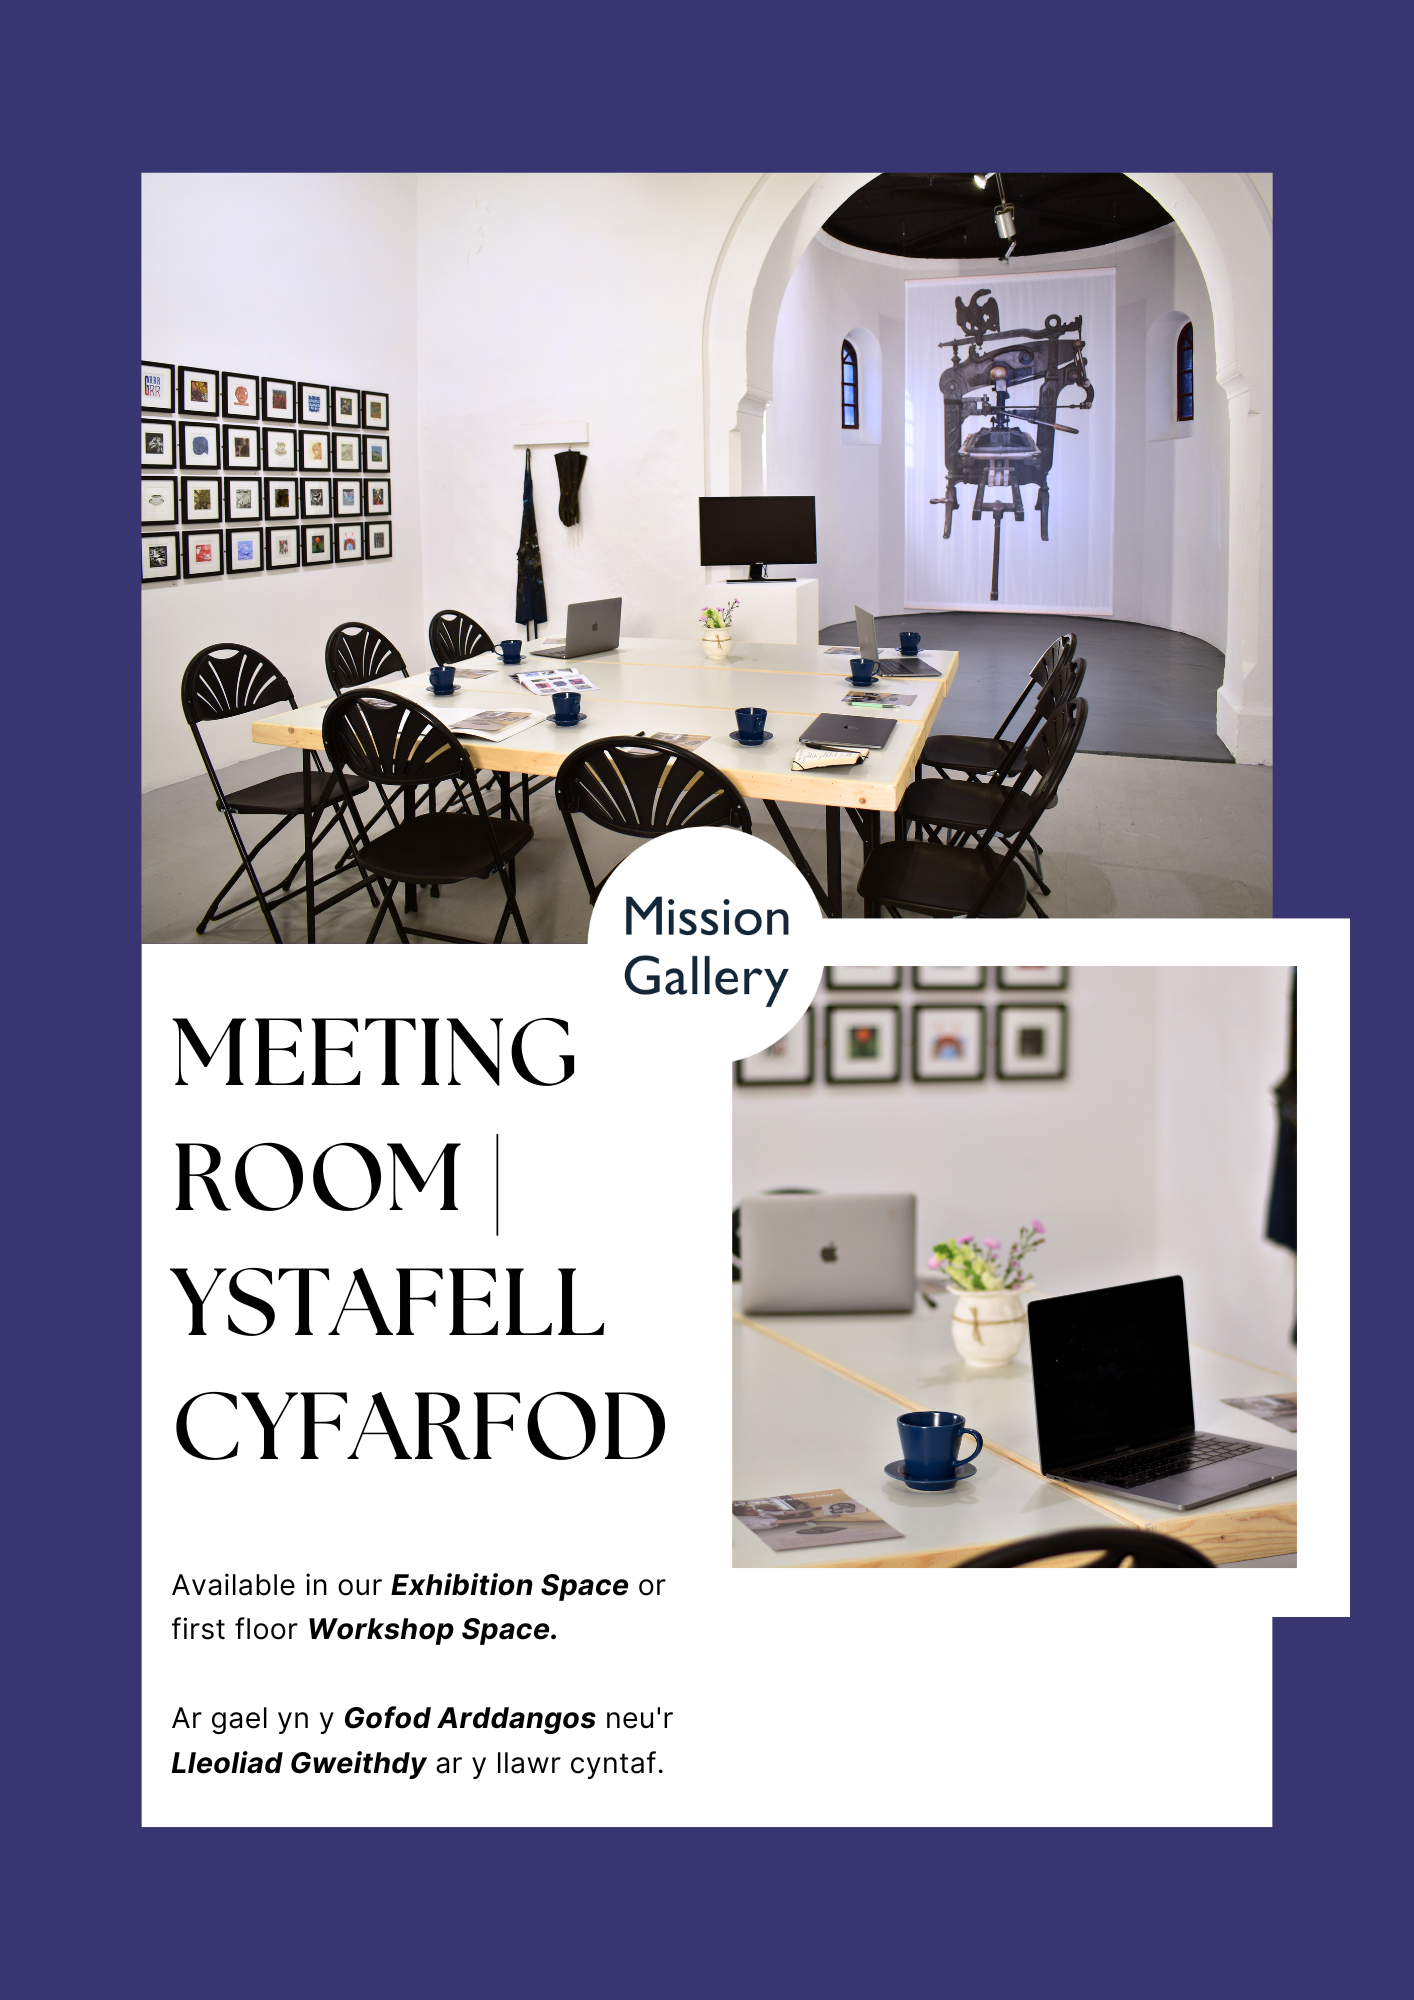 Mission Gallery Venue Hire Pack, meeting room